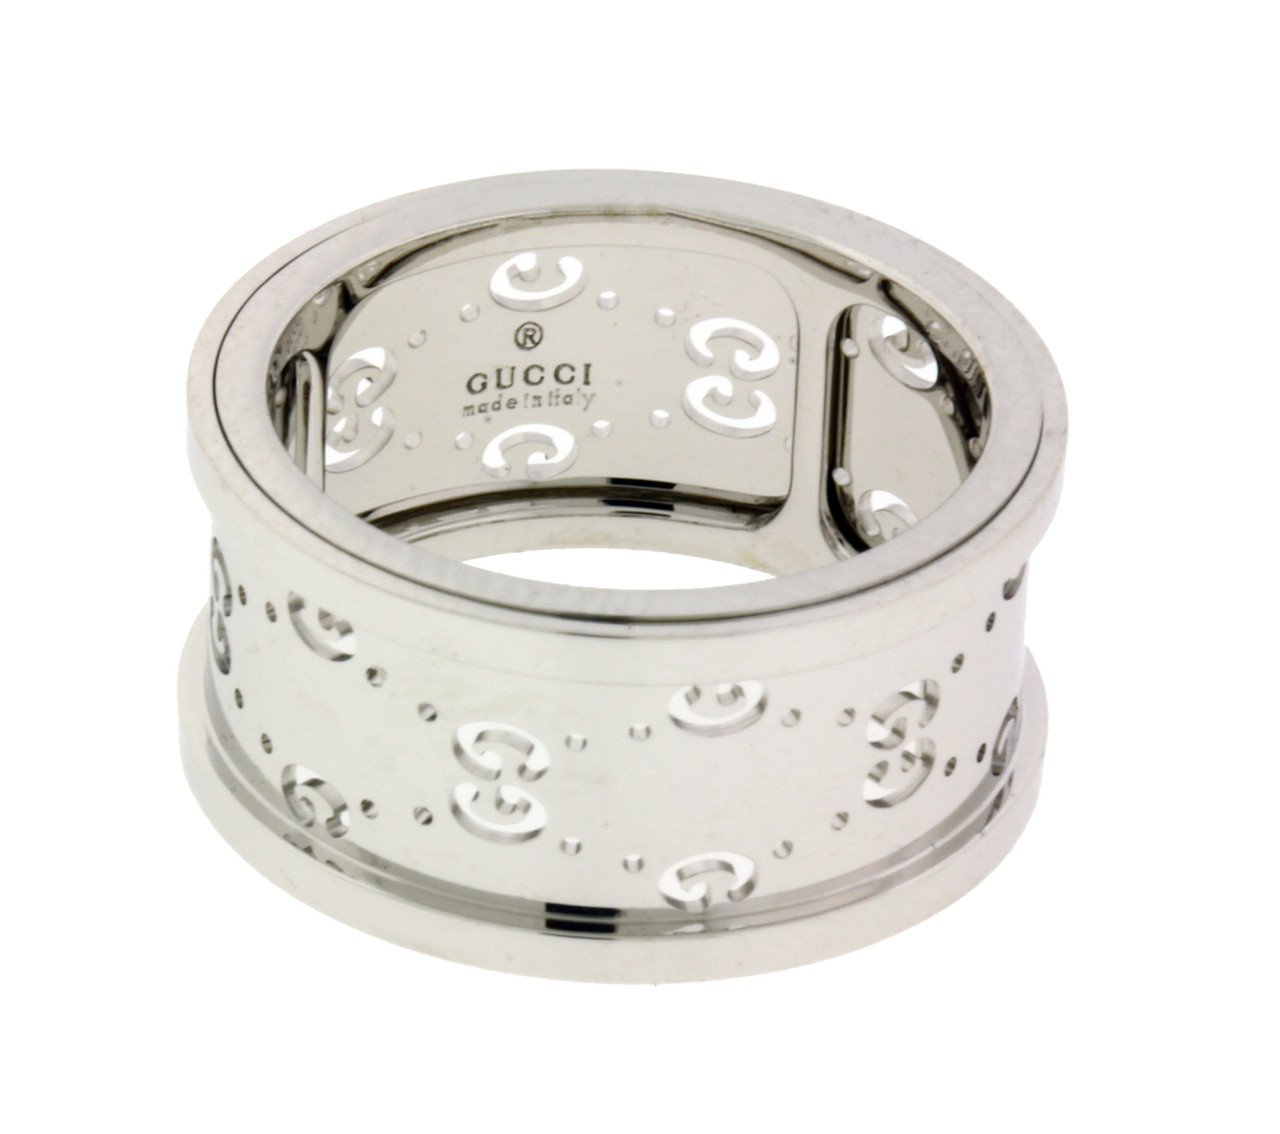 Gucci spinning ring in 18k white gold size 13 USA 